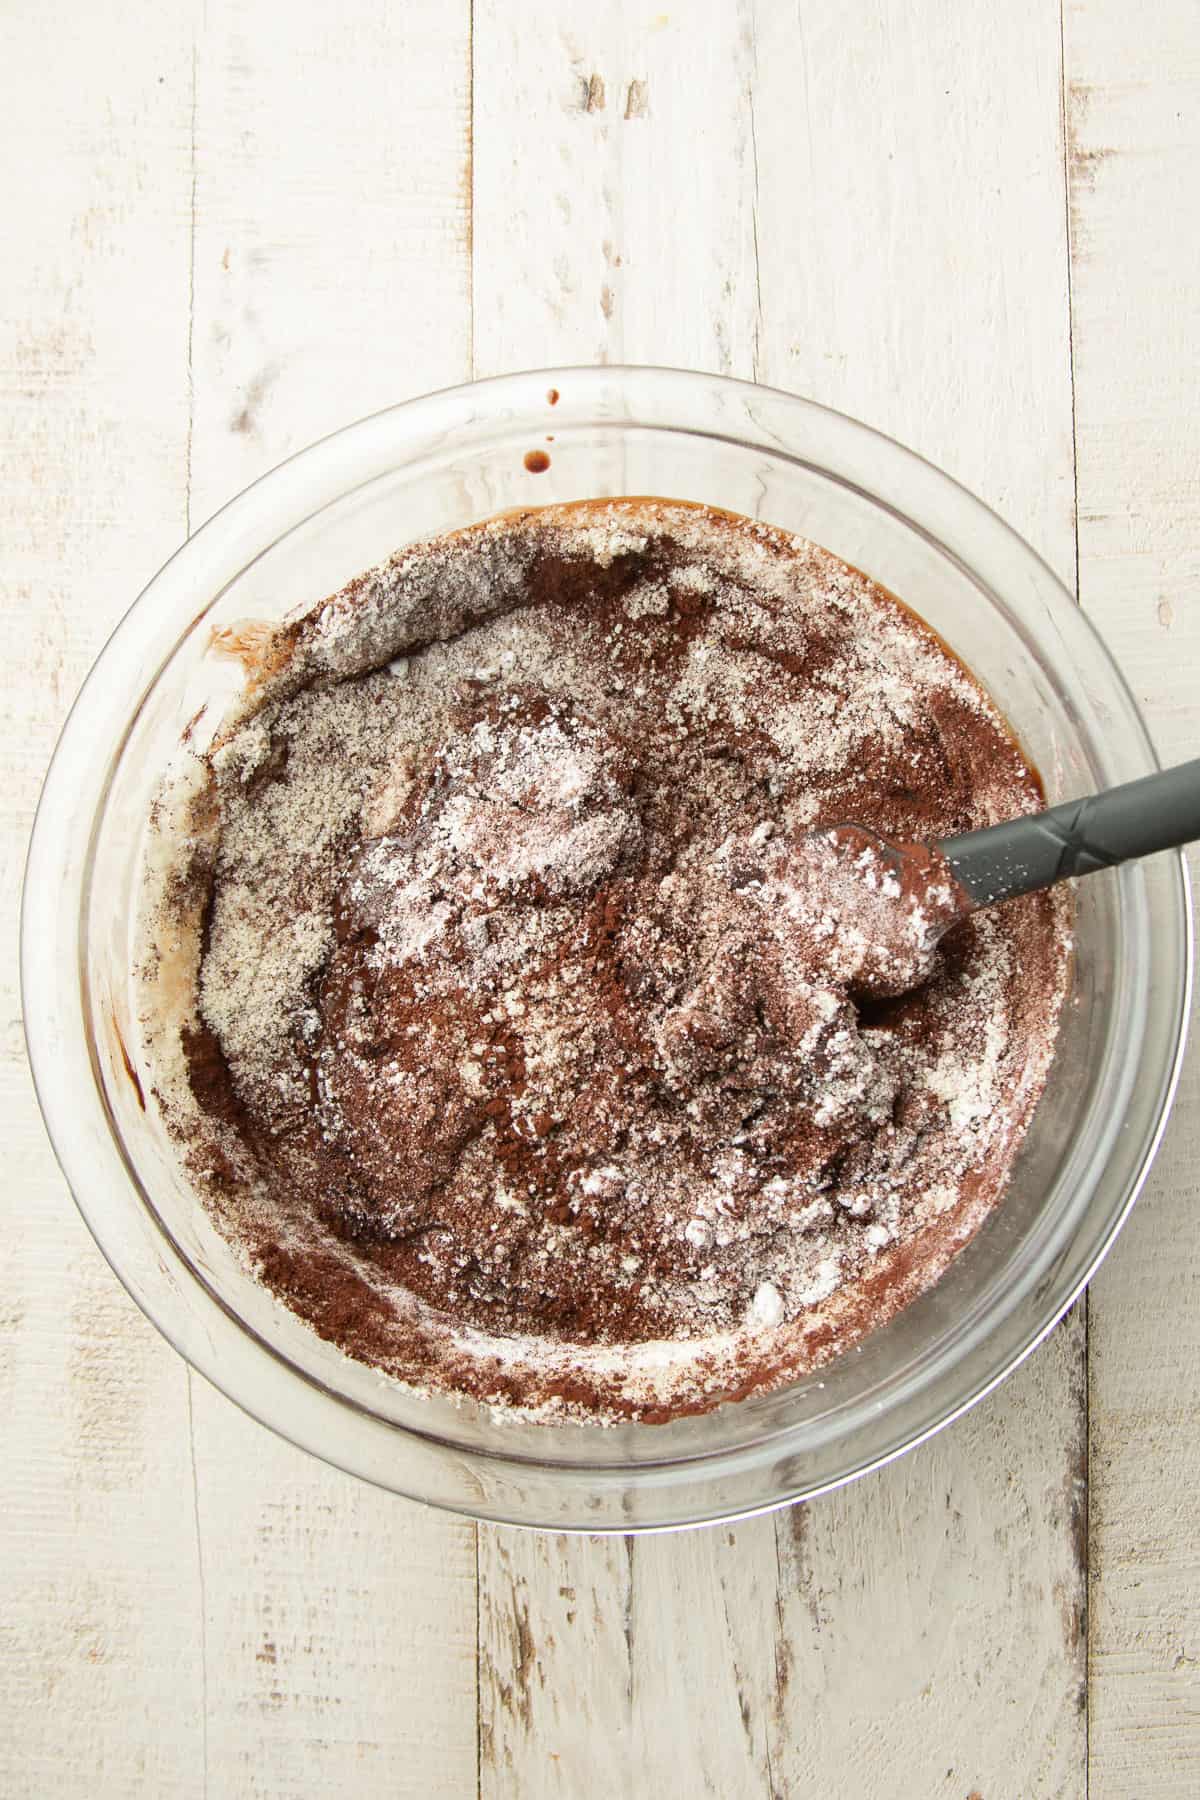 Melted chocolate in a mixing bowl with almond flour added.